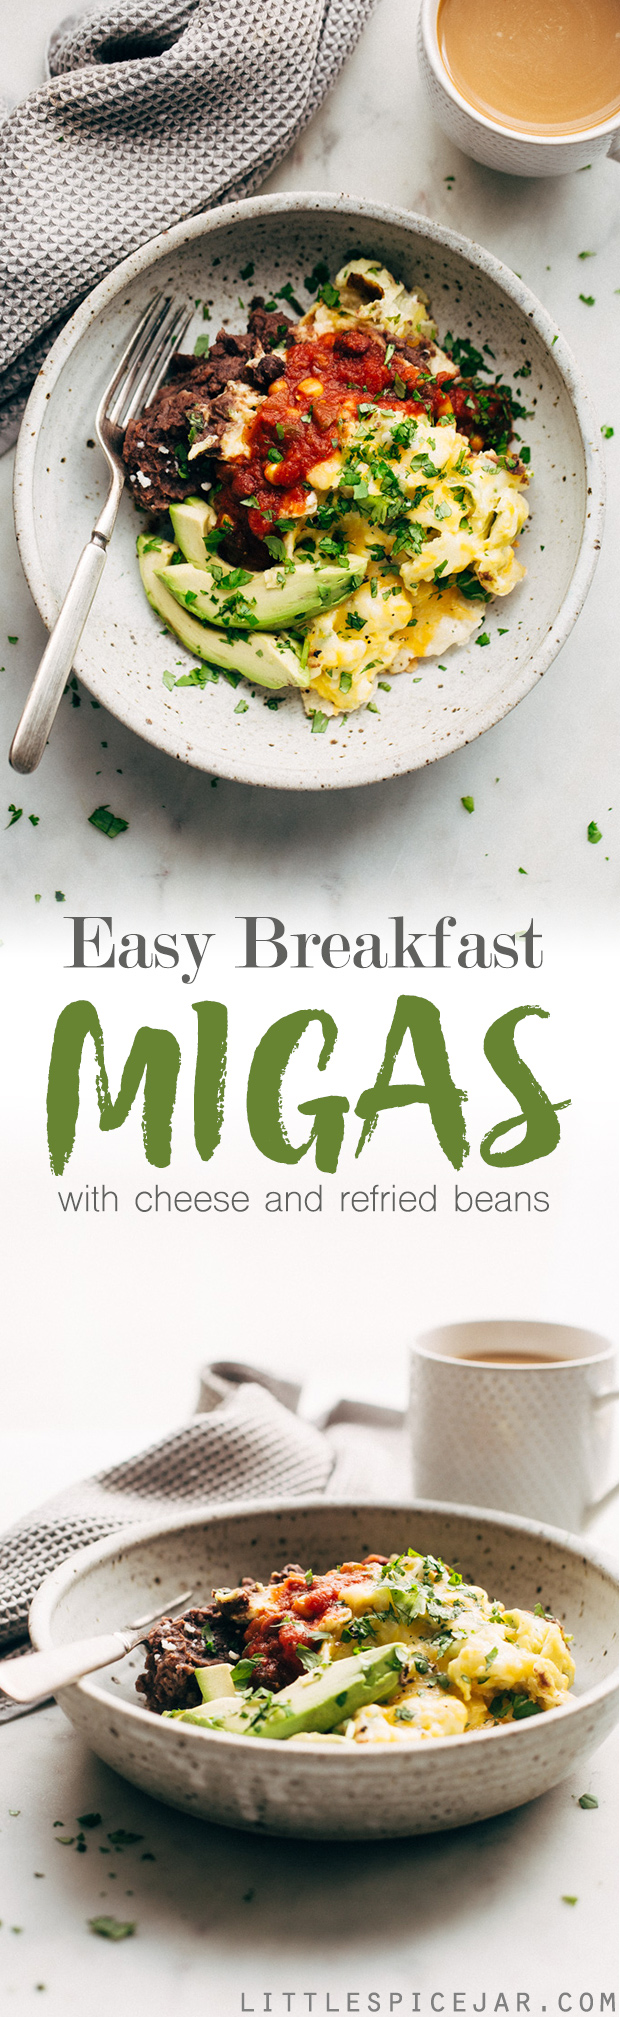 Easy Breakfast Migas - These Tex-Mex style scrambled eggs are made with tortilla chips, cheese, and lots of salsa! #migas #texmex #breakfast #brinner | Litltlespicejar.com